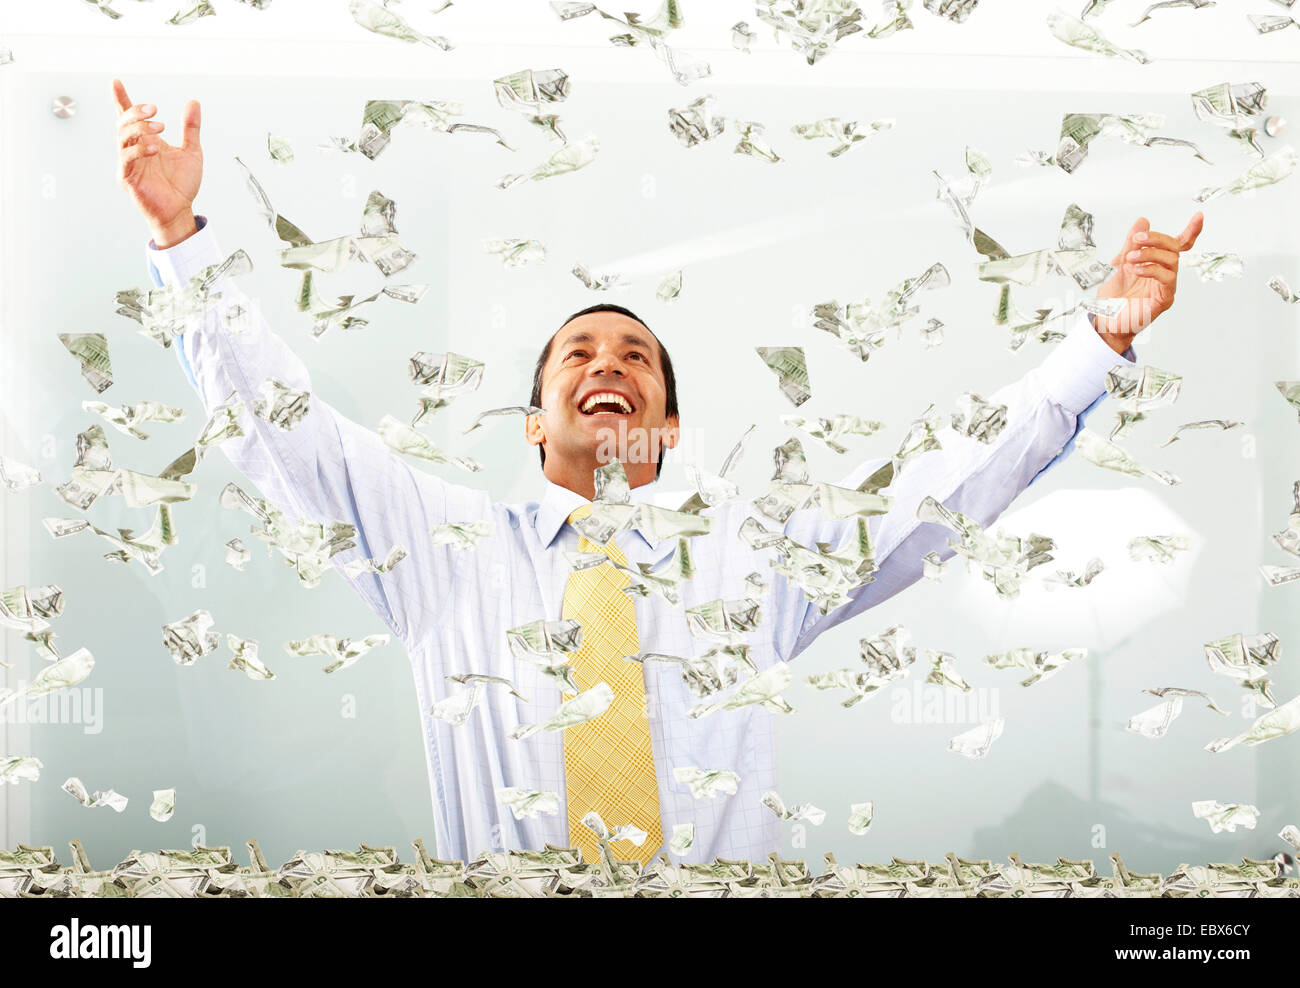 business success - man with lots of money smiling Stock Photo